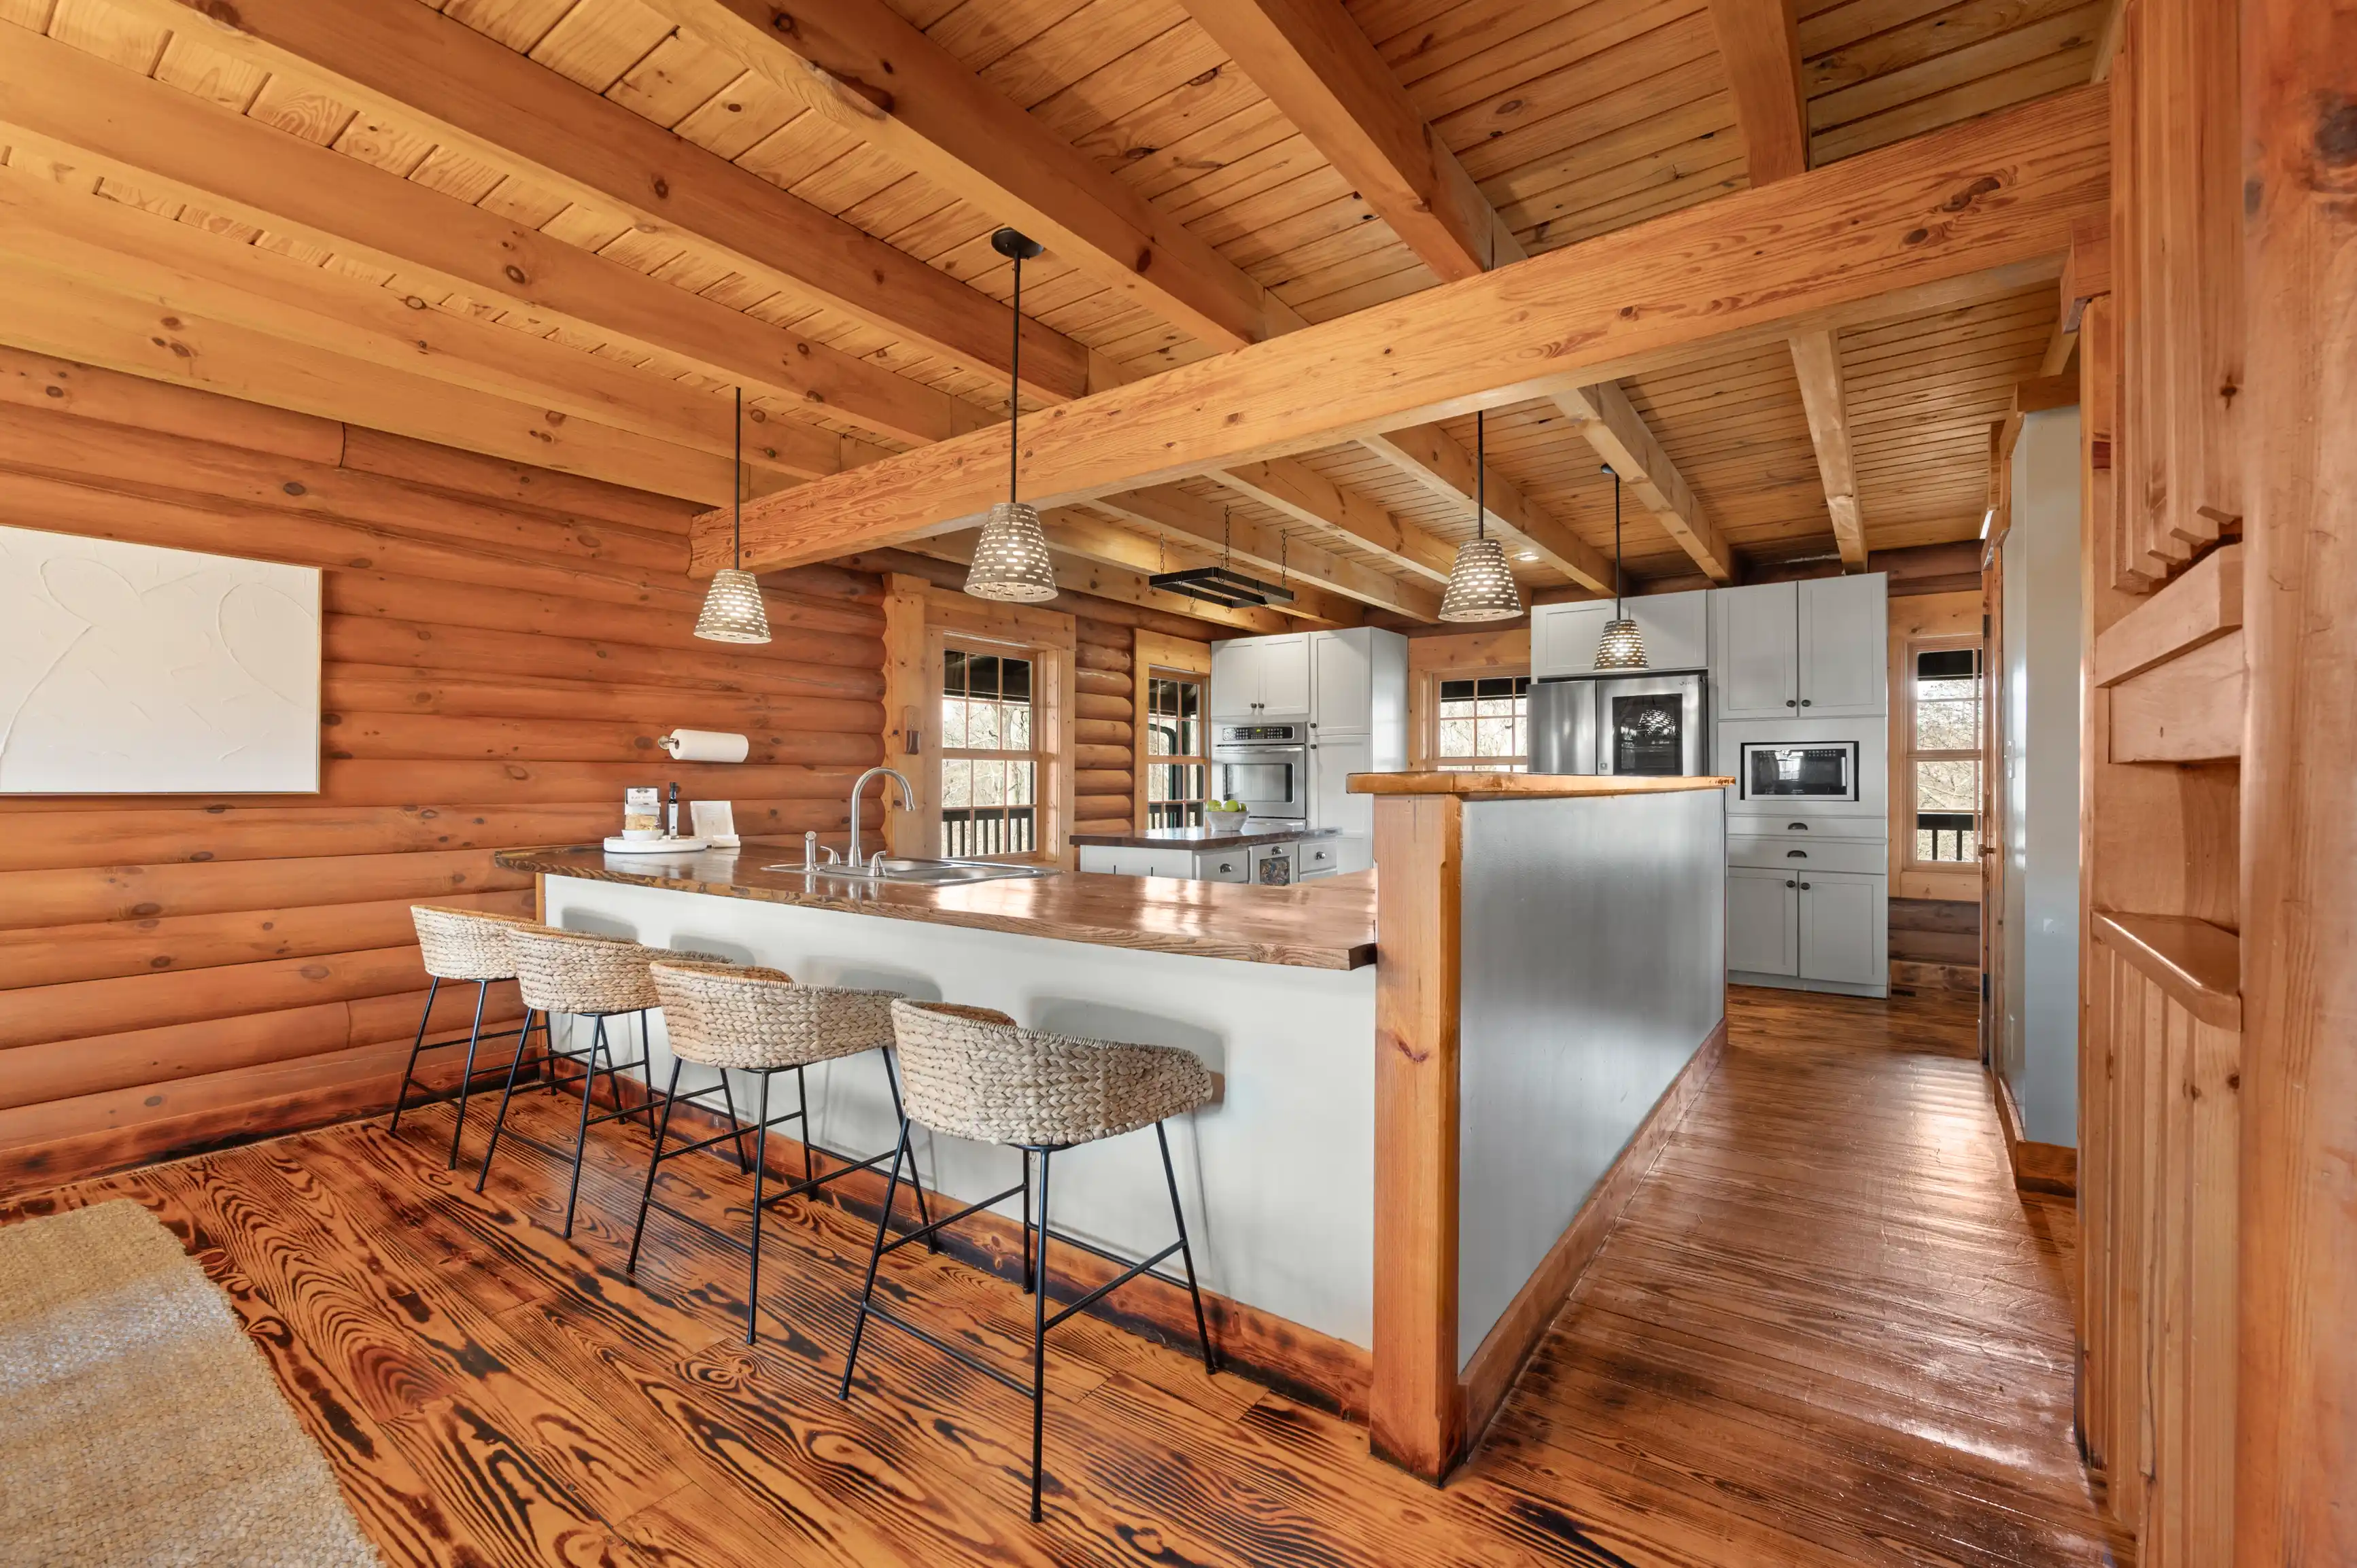 Rustic log cabin interior kitchen with wood beams, stainless steel appliances, and a bar seating area.